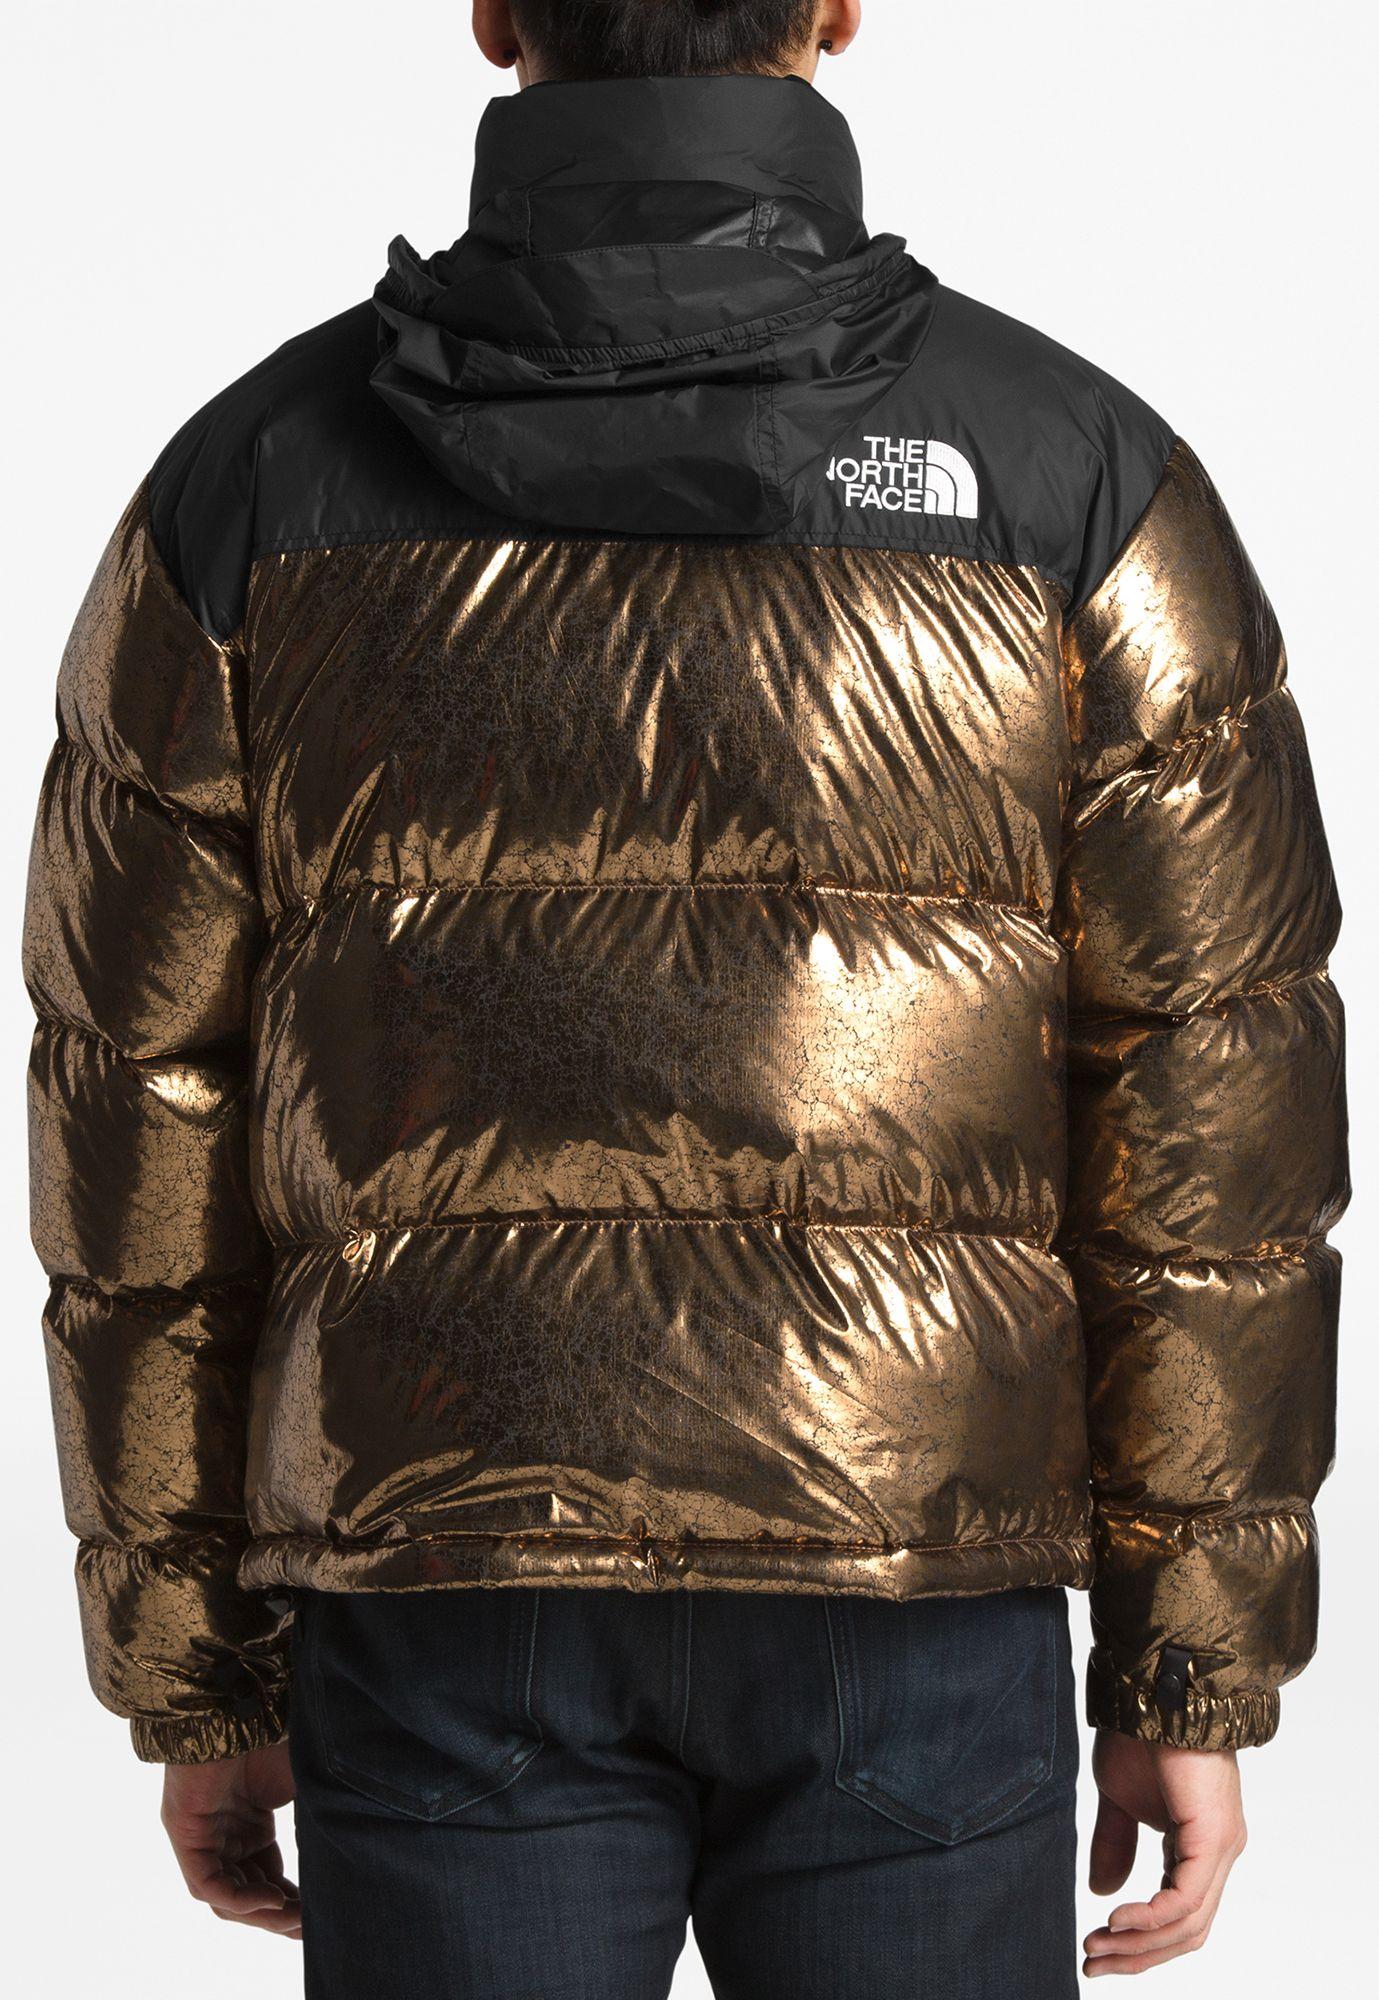 North Face Nuptse Metallic Copper Spain, SAVE 33% - thecocktail-clinic.com